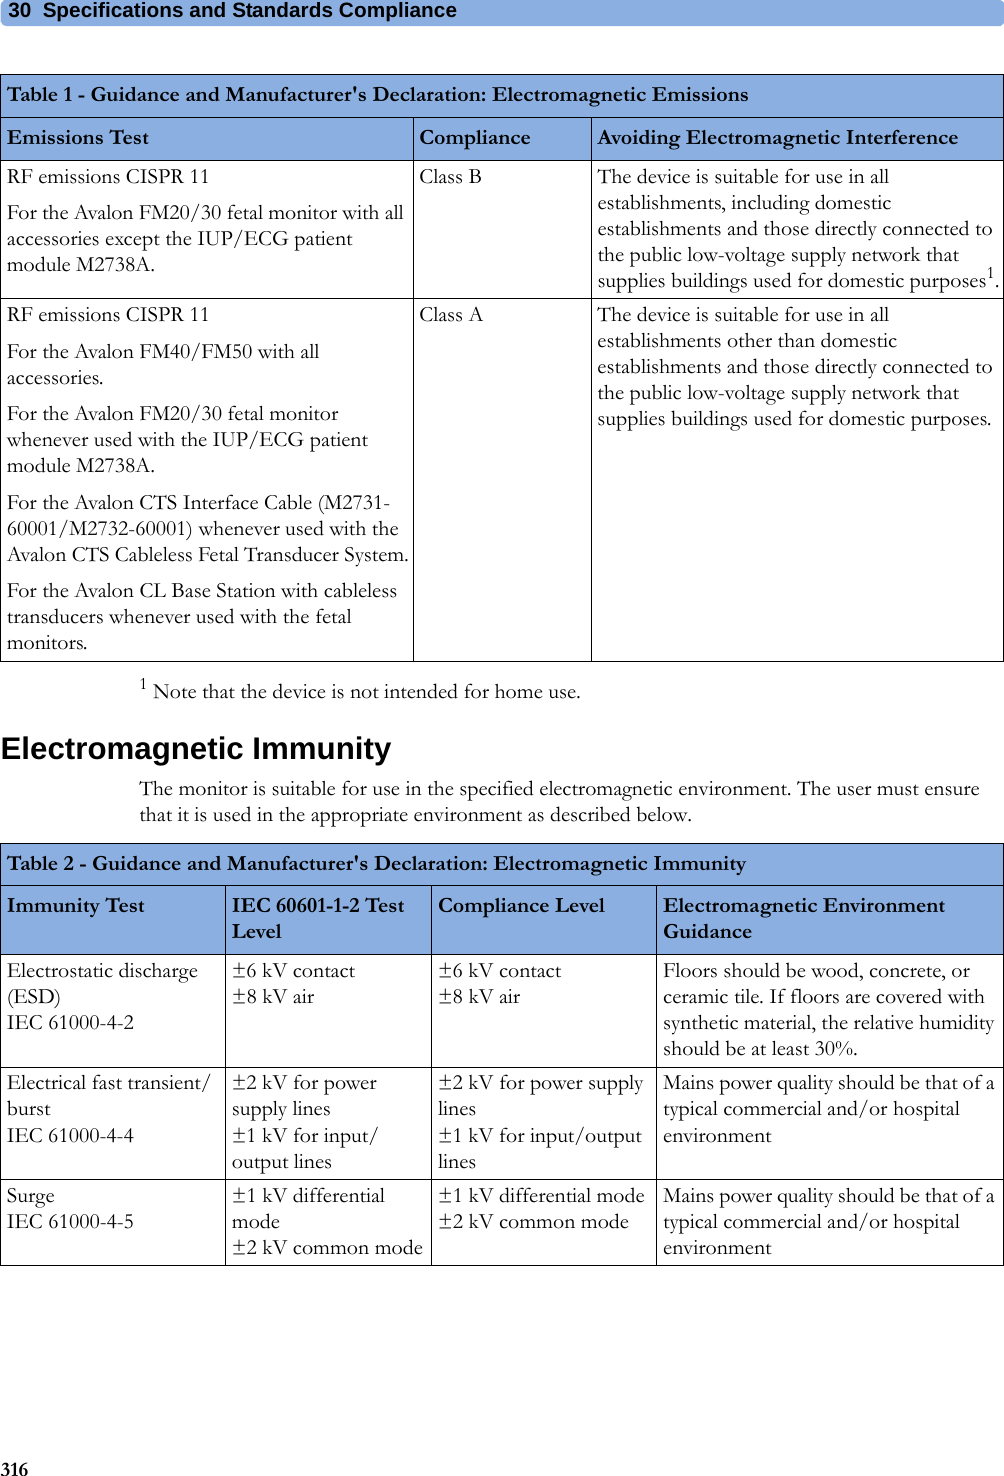 30  Specifications and Standards Compliance3161 Note that the device is not intended for home use.Electromagnetic ImmunityThe monitor is suitable for use in the specified electromagnetic environment. The user must ensure that it is used in the appropriate environment as described below.RF emissions CISPR 11For the Avalon FM20/30 fetal monitor with all accessories except the IUP/ECG patient module M2738A.Class B The device is suitable for use in all establishments, including domestic establishments and those directly connected to the public low-voltage supply network that supplies buildings used for domestic purposes1.RF emissions CISPR 11For the Avalon FM40/FM50 with all accessories.For the Avalon FM20/30 fetal monitor whenever used with the IUP/ECG patient module M2738A.For the Avalon CTS Interface Cable (M2731-60001/M2732-60001) whenever used with the Avalon CTS Cableless Fetal Transducer System.For the Avalon CL Base Station with cableless transducers whenever used with the fetal monitors.Class A The device is suitable for use in all establishments other than domestic establishments and those directly connected to the public low-voltage supply network that supplies buildings used for domestic purposes.Table 1 - Guidance and Manufacturer&apos;s Declaration: Electromagnetic EmissionsEmissions Test Compliance Avoiding Electromagnetic InterferenceTable 2 - Guidance and Manufacturer&apos;s Declaration: Electromagnetic ImmunityImmunity Test IEC 60601-1-2 Test LevelCompliance Level Electromagnetic Environment GuidanceElectrostatic discharge (ESD)  IEC 61000-4-2±6 kV contact ±8 kV air±6 kV contact ±8 kV airFloors should be wood, concrete, or ceramic tile. If floors are covered with synthetic material, the relative humidity should be at least 30%.Electrical fast transient/burst IEC 61000-4-4±2 kV for power supply lines ±1 kV for input/output lines±2 kV for power supply lines ±1 kV for input/output linesMains power quality should be that of a typical commercial and/or hospital environmentSurge  IEC 61000-4-5±1 kV differential mode ±2 kV common mode±1 kV differential mode ±2 kV common modeMains power quality should be that of a typical commercial and/or hospital environment